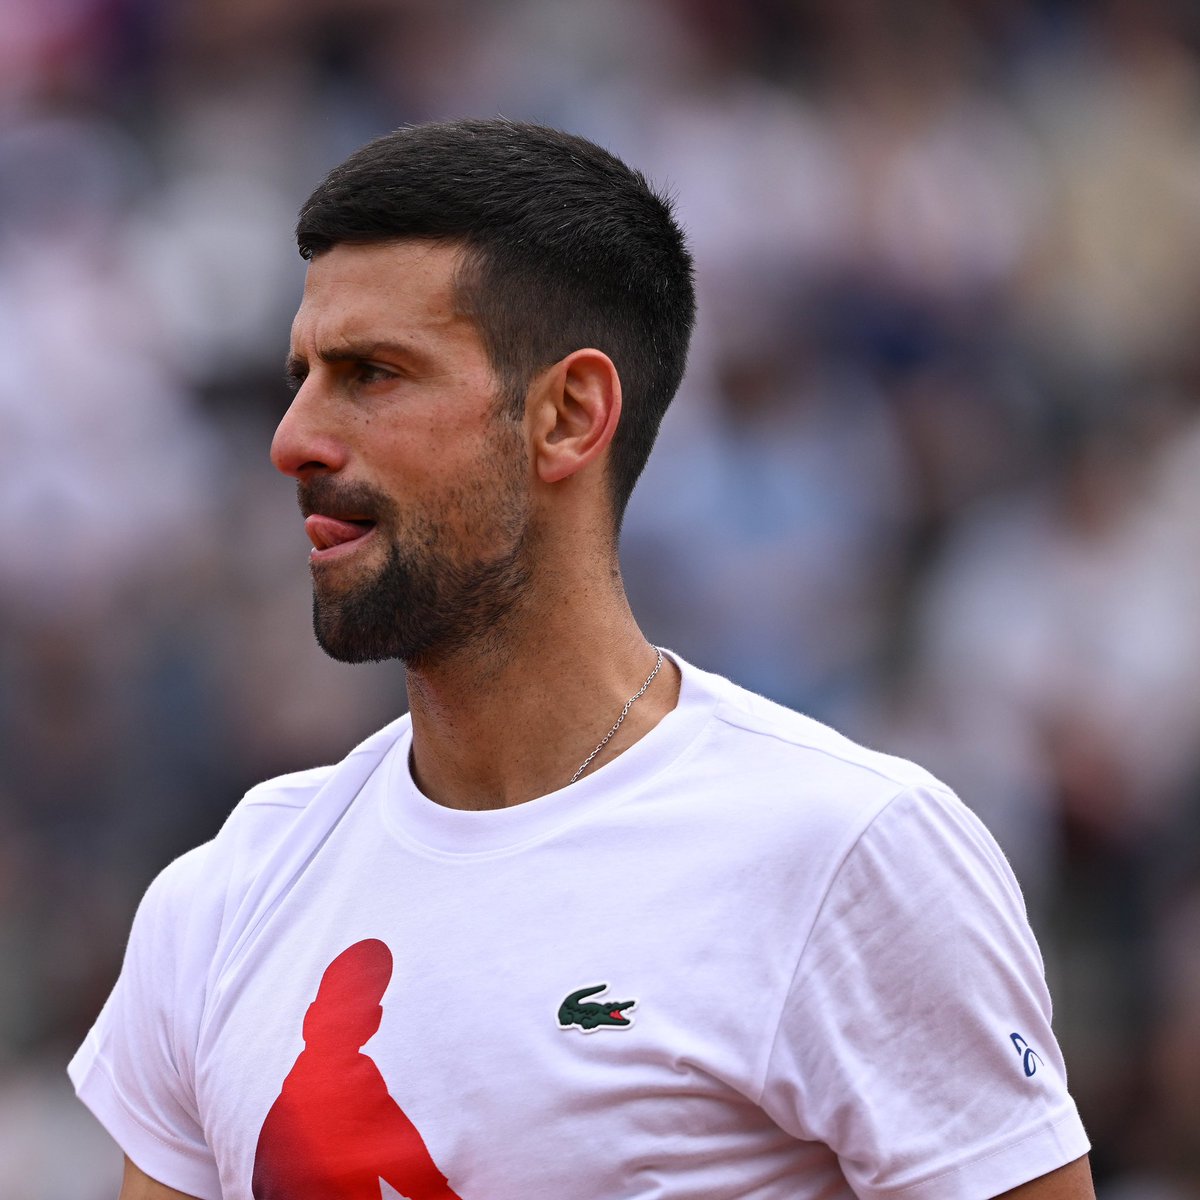 IDEMOO 💪🏻💪🏻 Nole takes the first set 6-3 over Moutet 🙌🏻❤️🇮🇹 #IBI24 #Rome #Nolefam @DjokerNole ONE MORE 🙏🏼🙏🏼